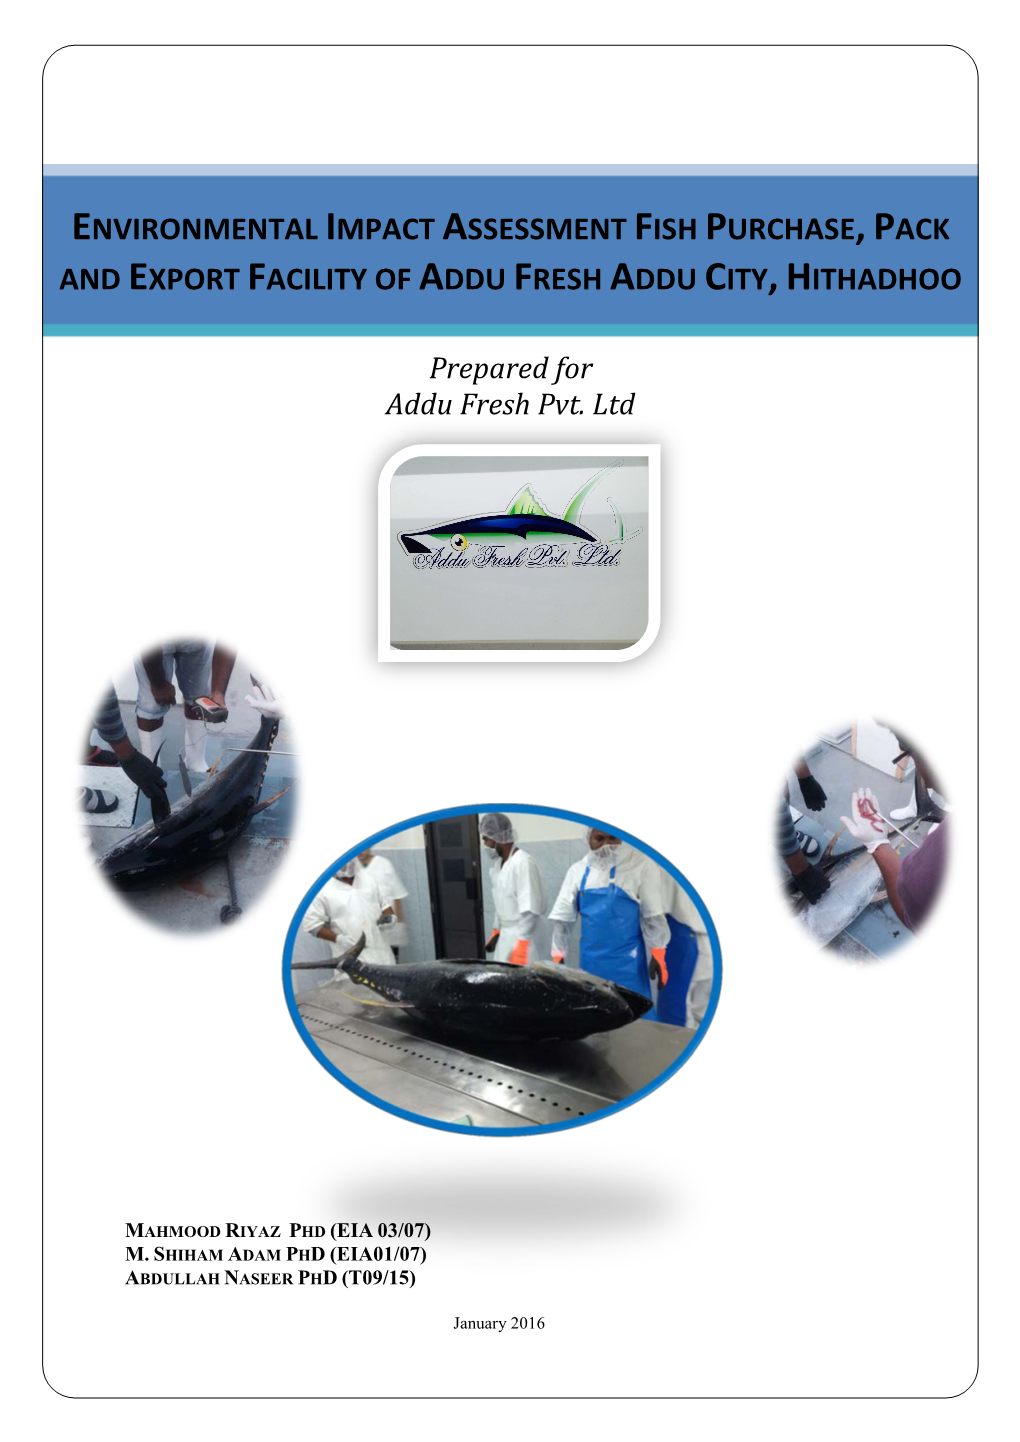 Environmental Impact Assessment Fish Purchase, Pack and Export Facility of Addu Fresh Addu City, Hithadhoo